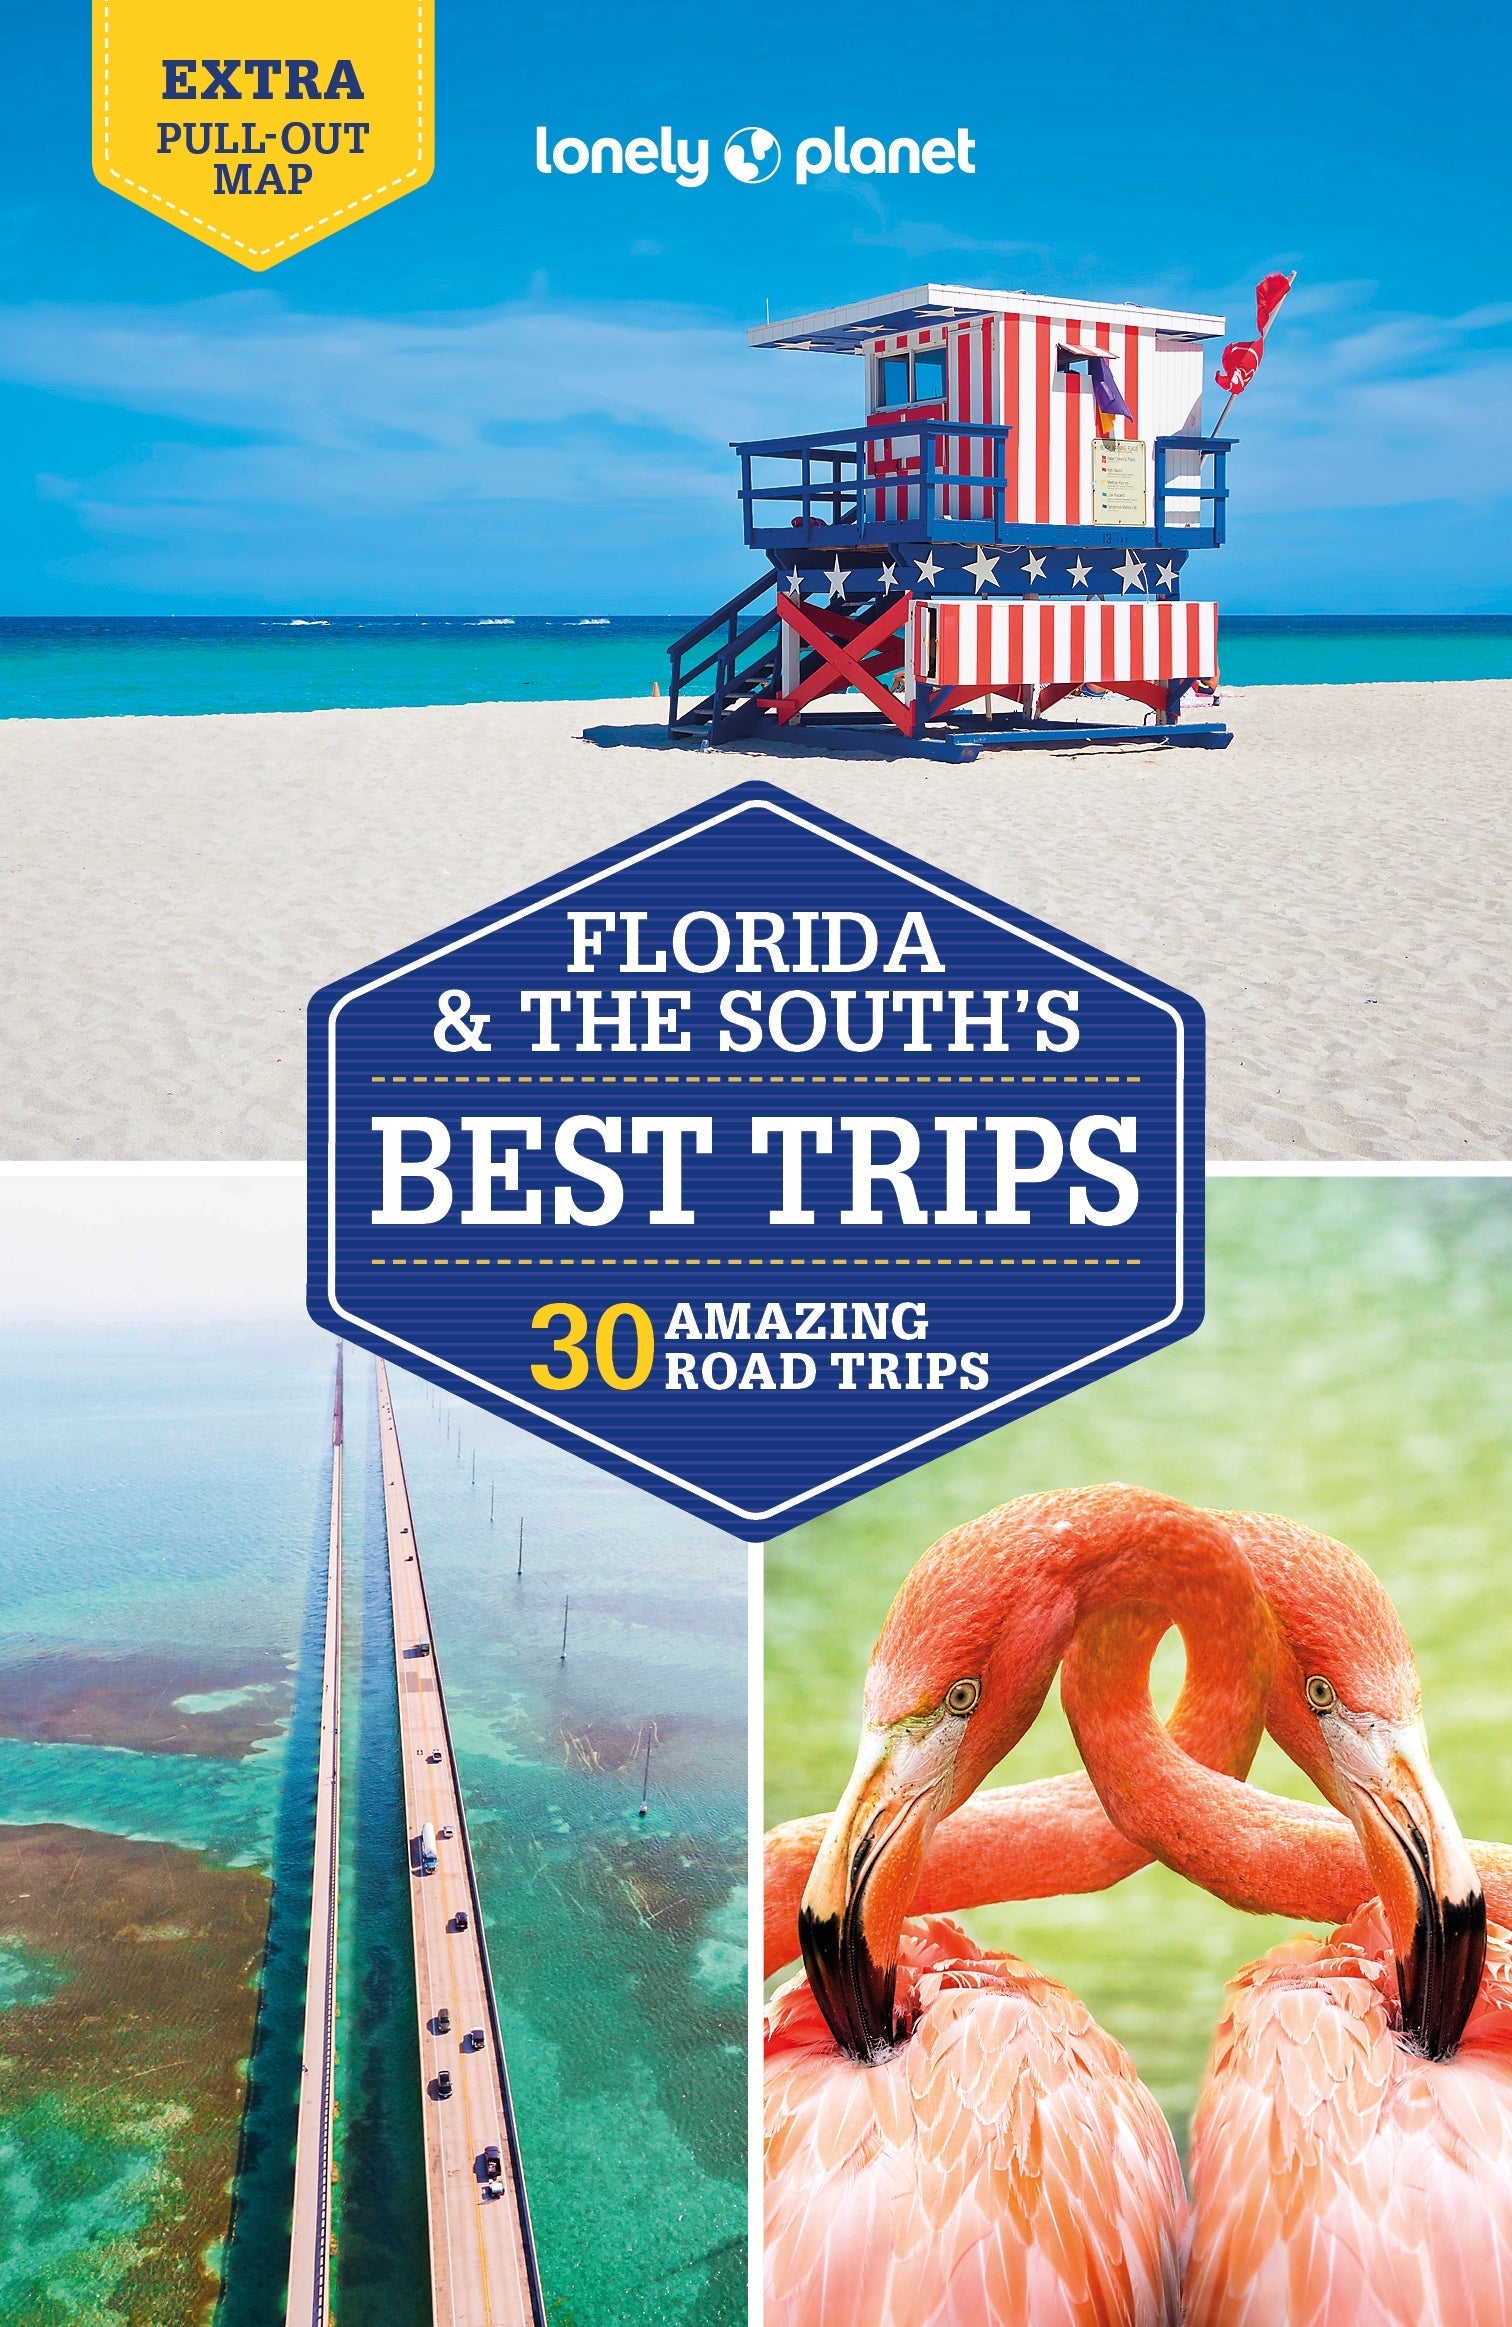 Florida & the South's Best Trips preview